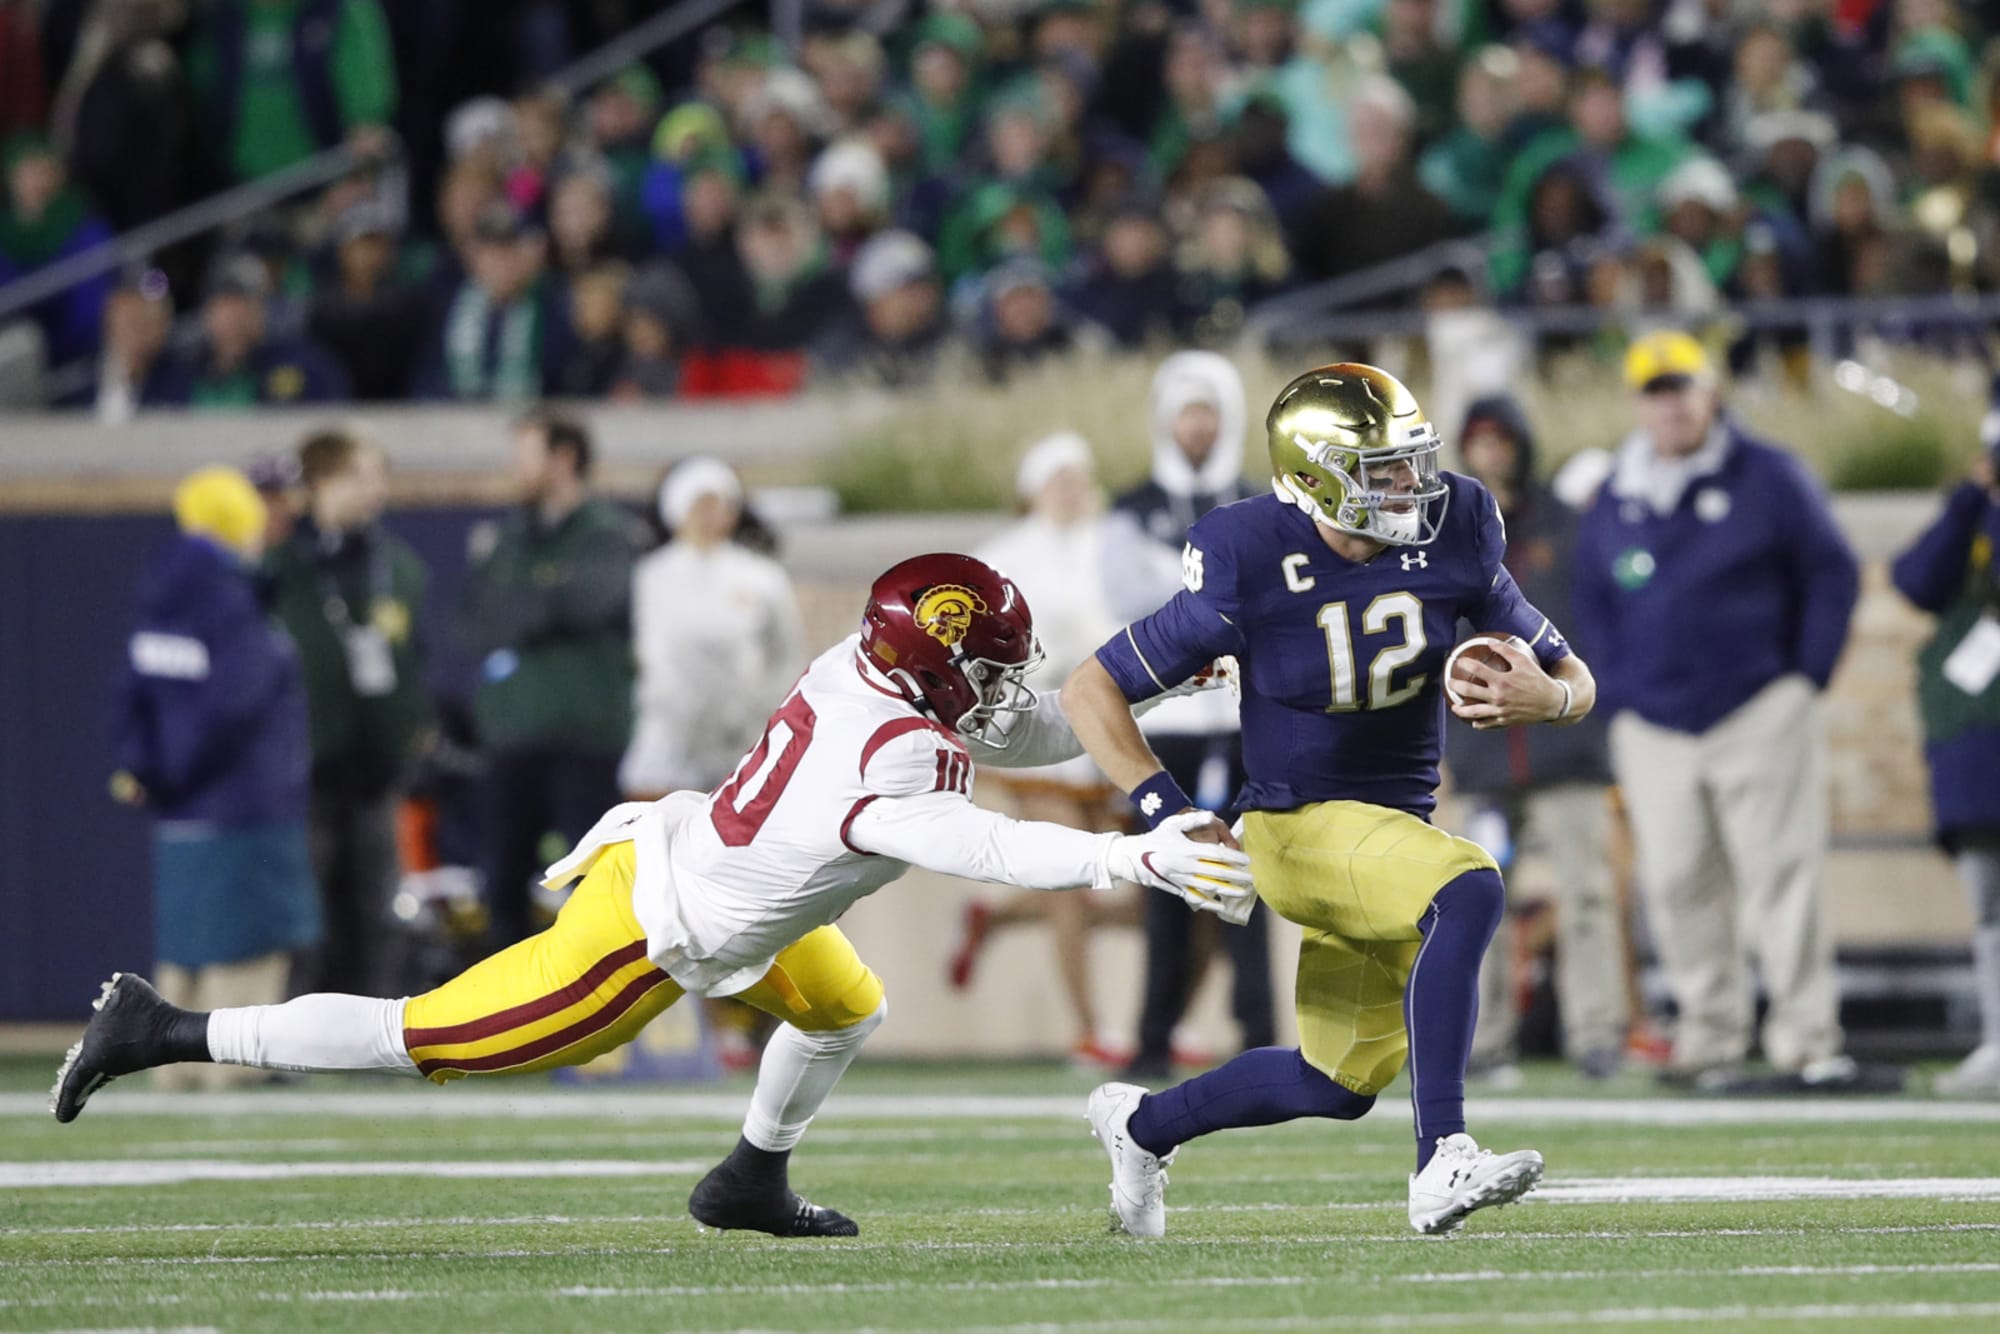 Notre Dame: The play that changed everything vs. USC